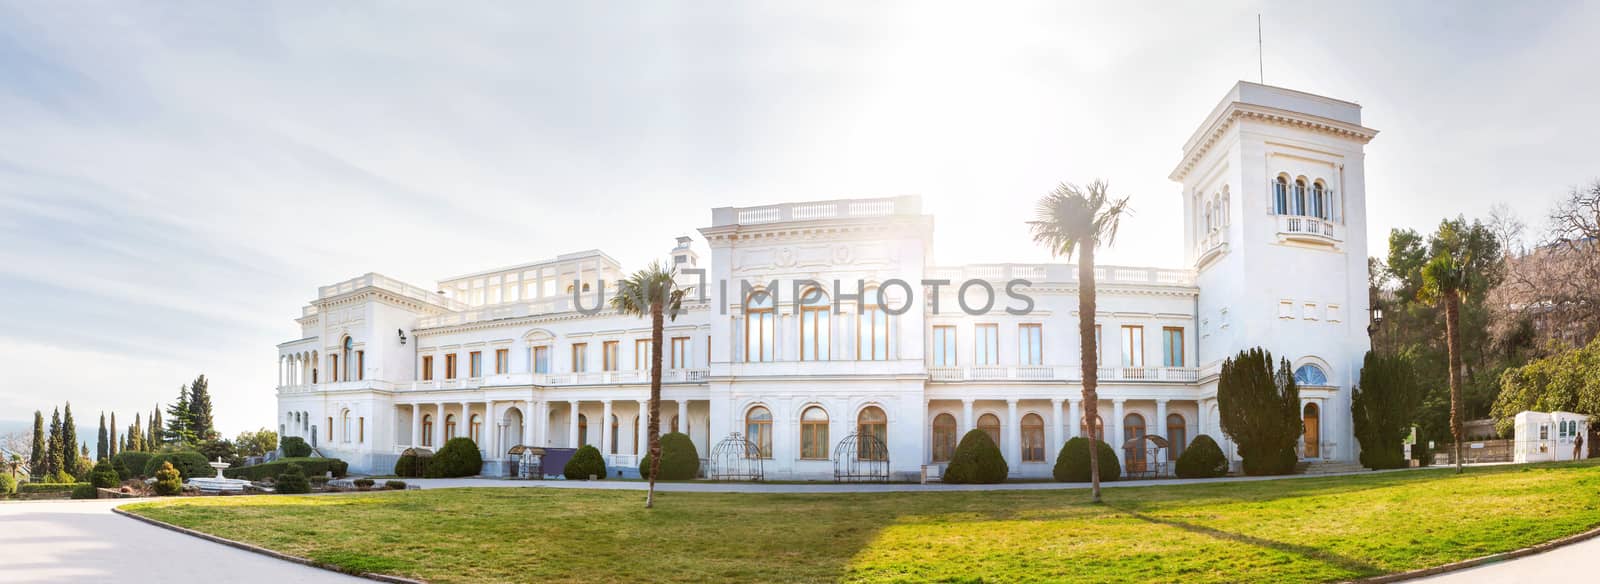 Panorama of Livadia Palace in Crimea. Summer manor of the last Russian tsar Nicholas II. Architectural monument. Russia. by aksenovko